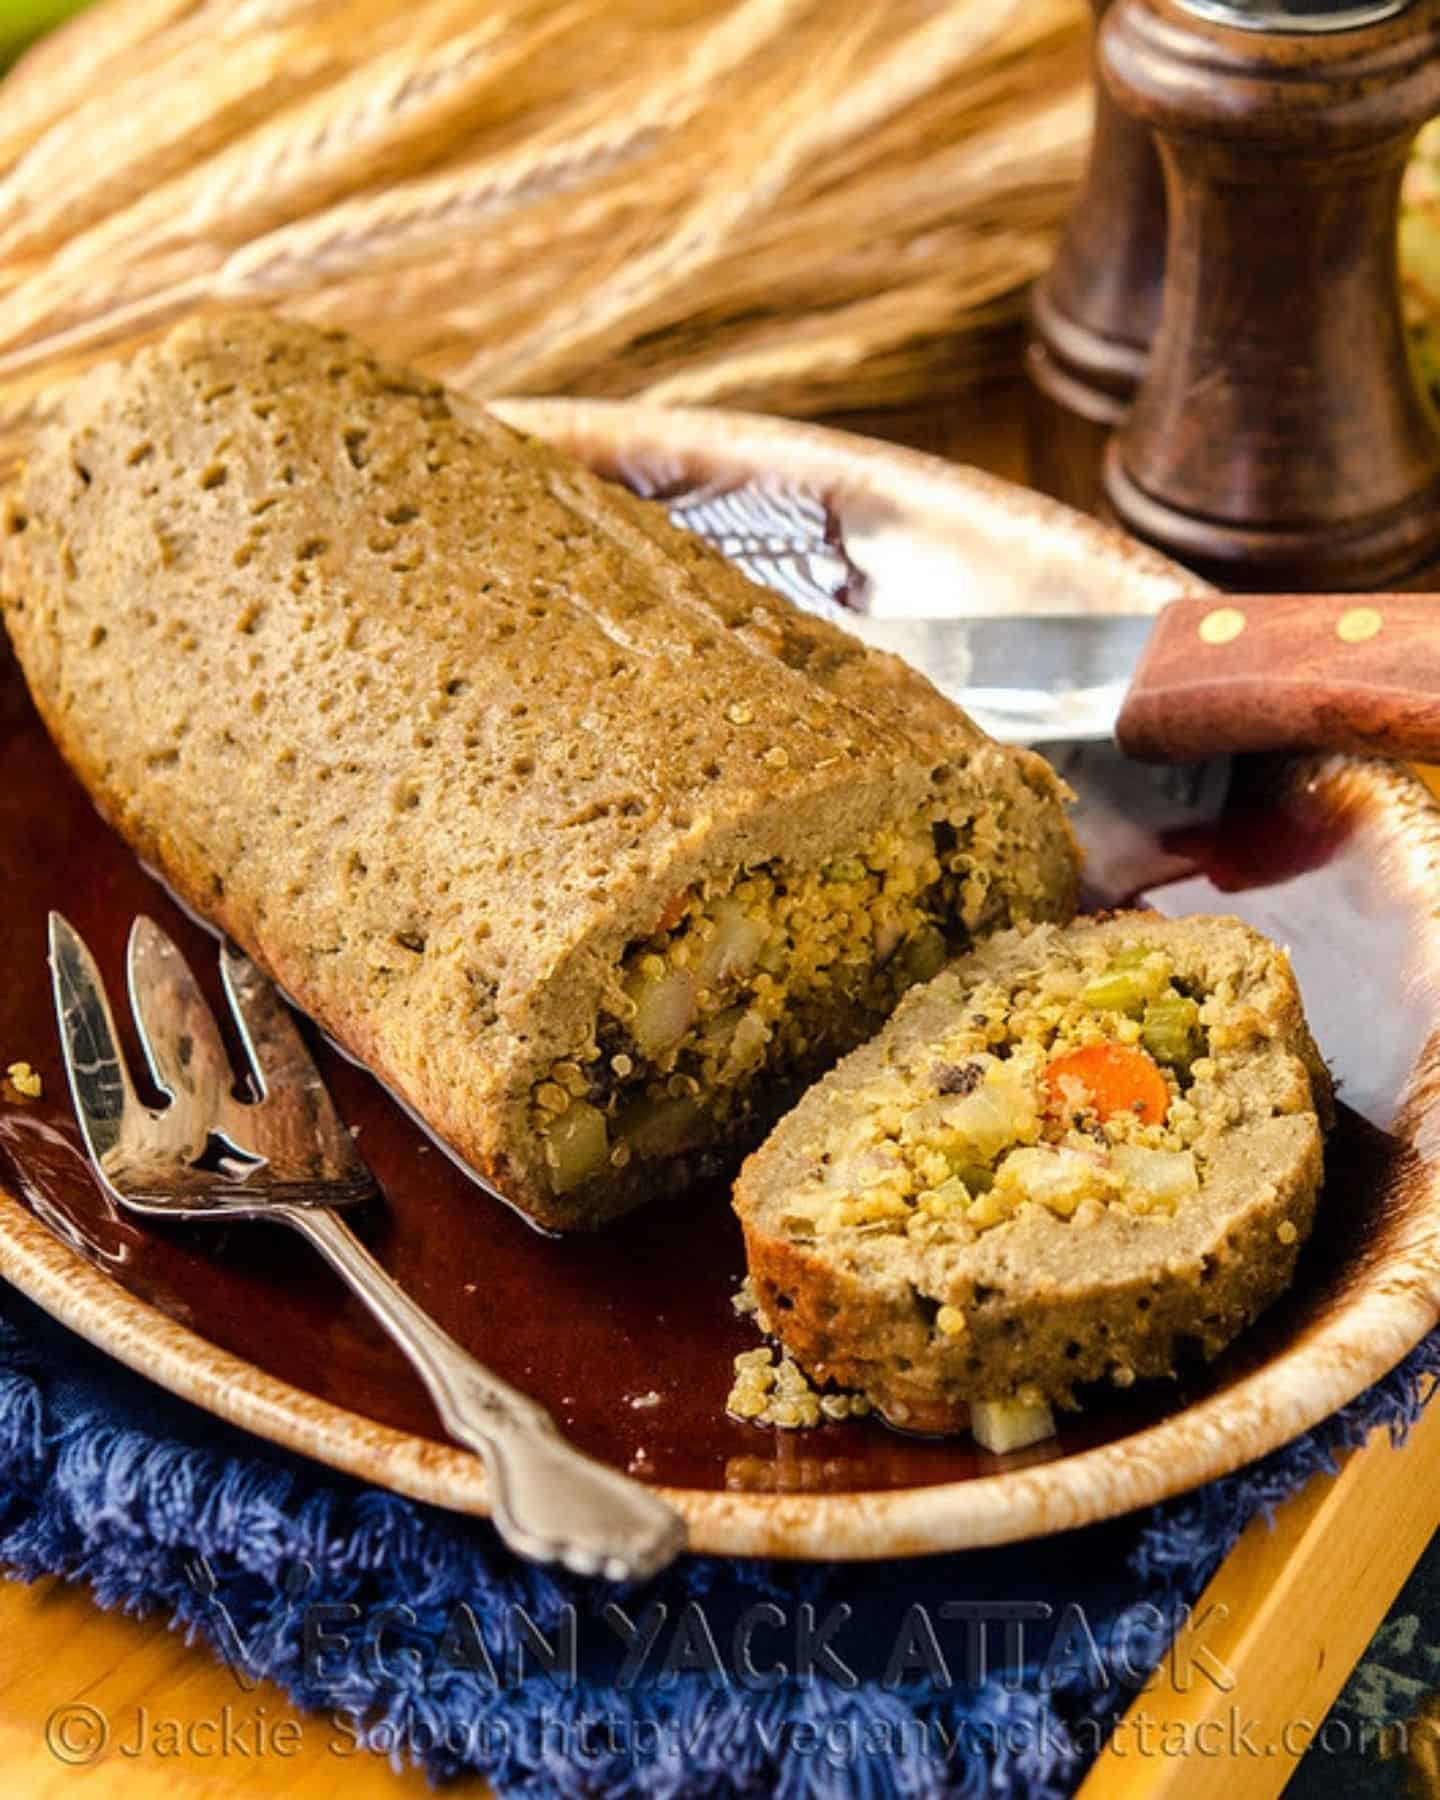 Stuffed seitan roast with serving knife and fork with one slice cut off